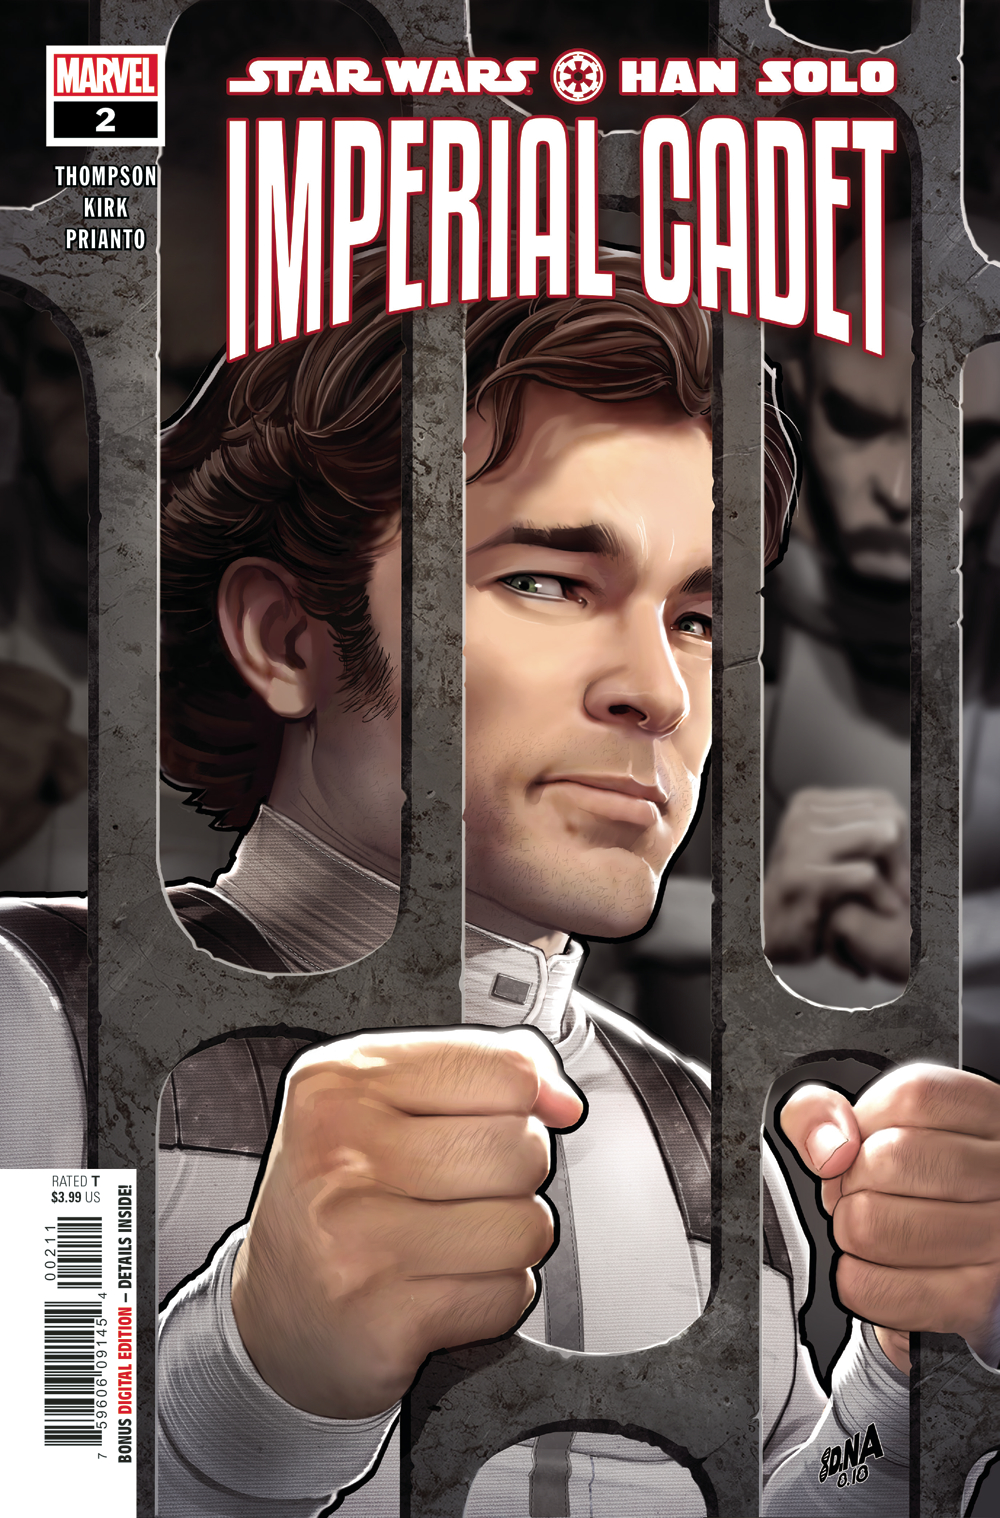 STAR WARS HAN SOLO IMPERIAL CADET #2 (OF 5)